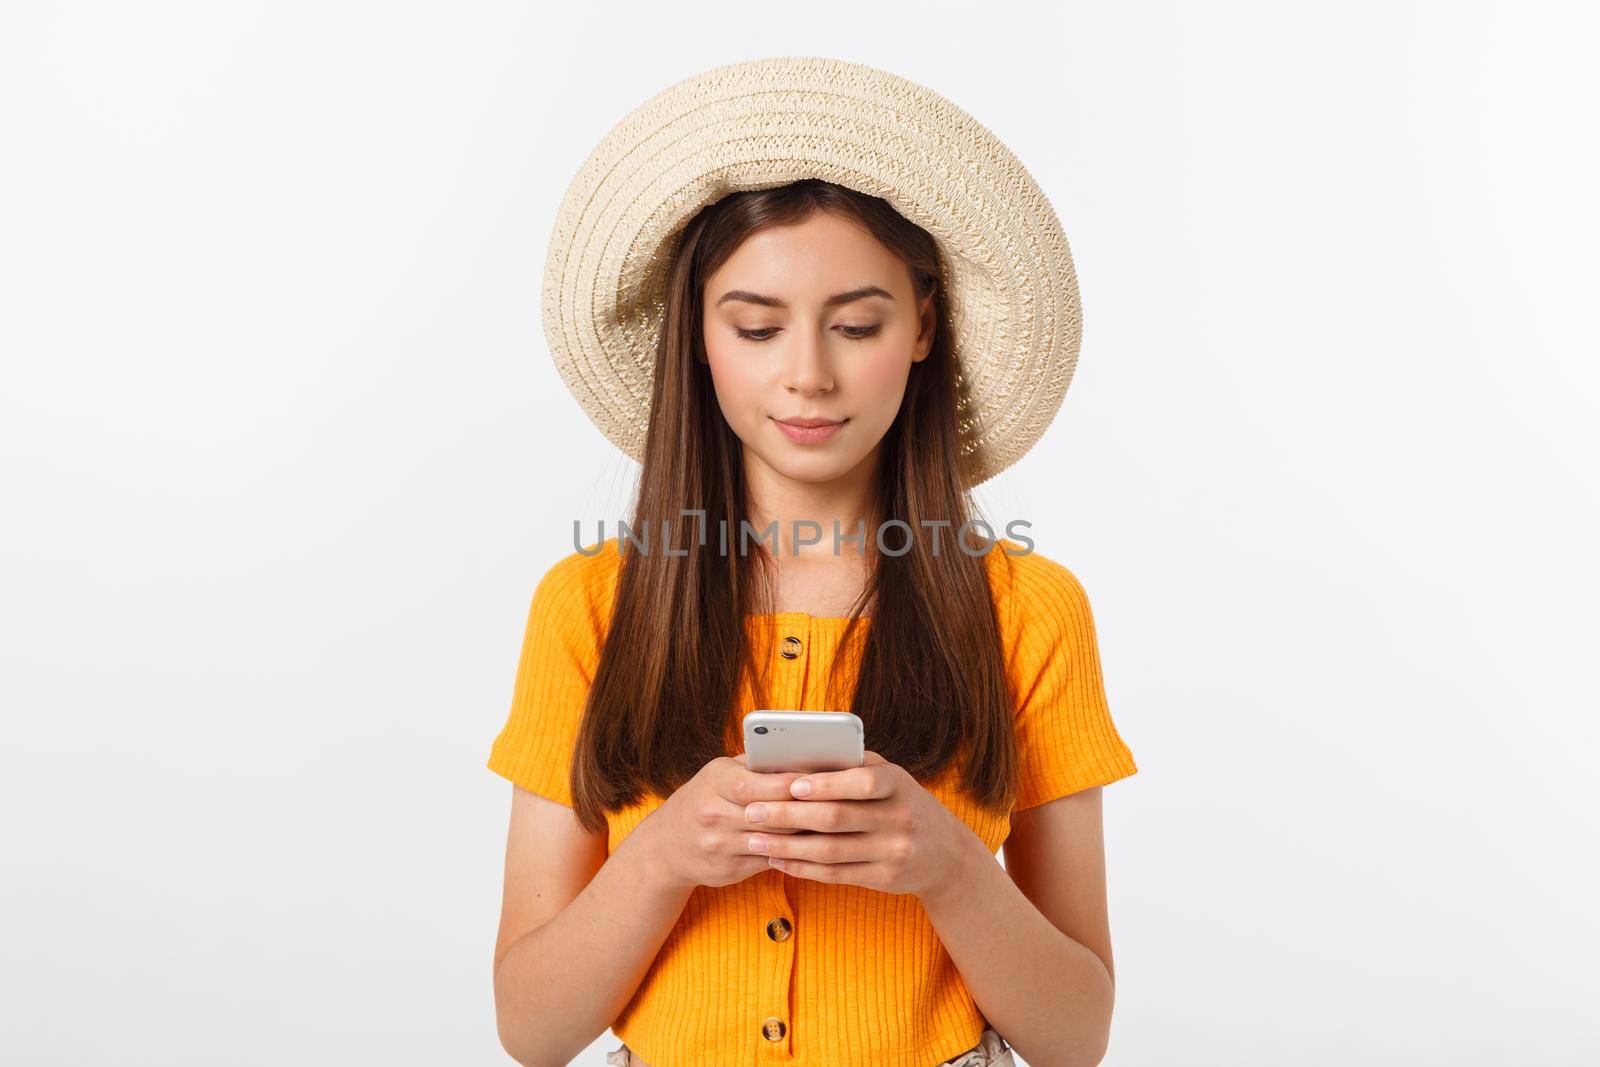 Woman sending a sms on cell phone, isolated on white background.